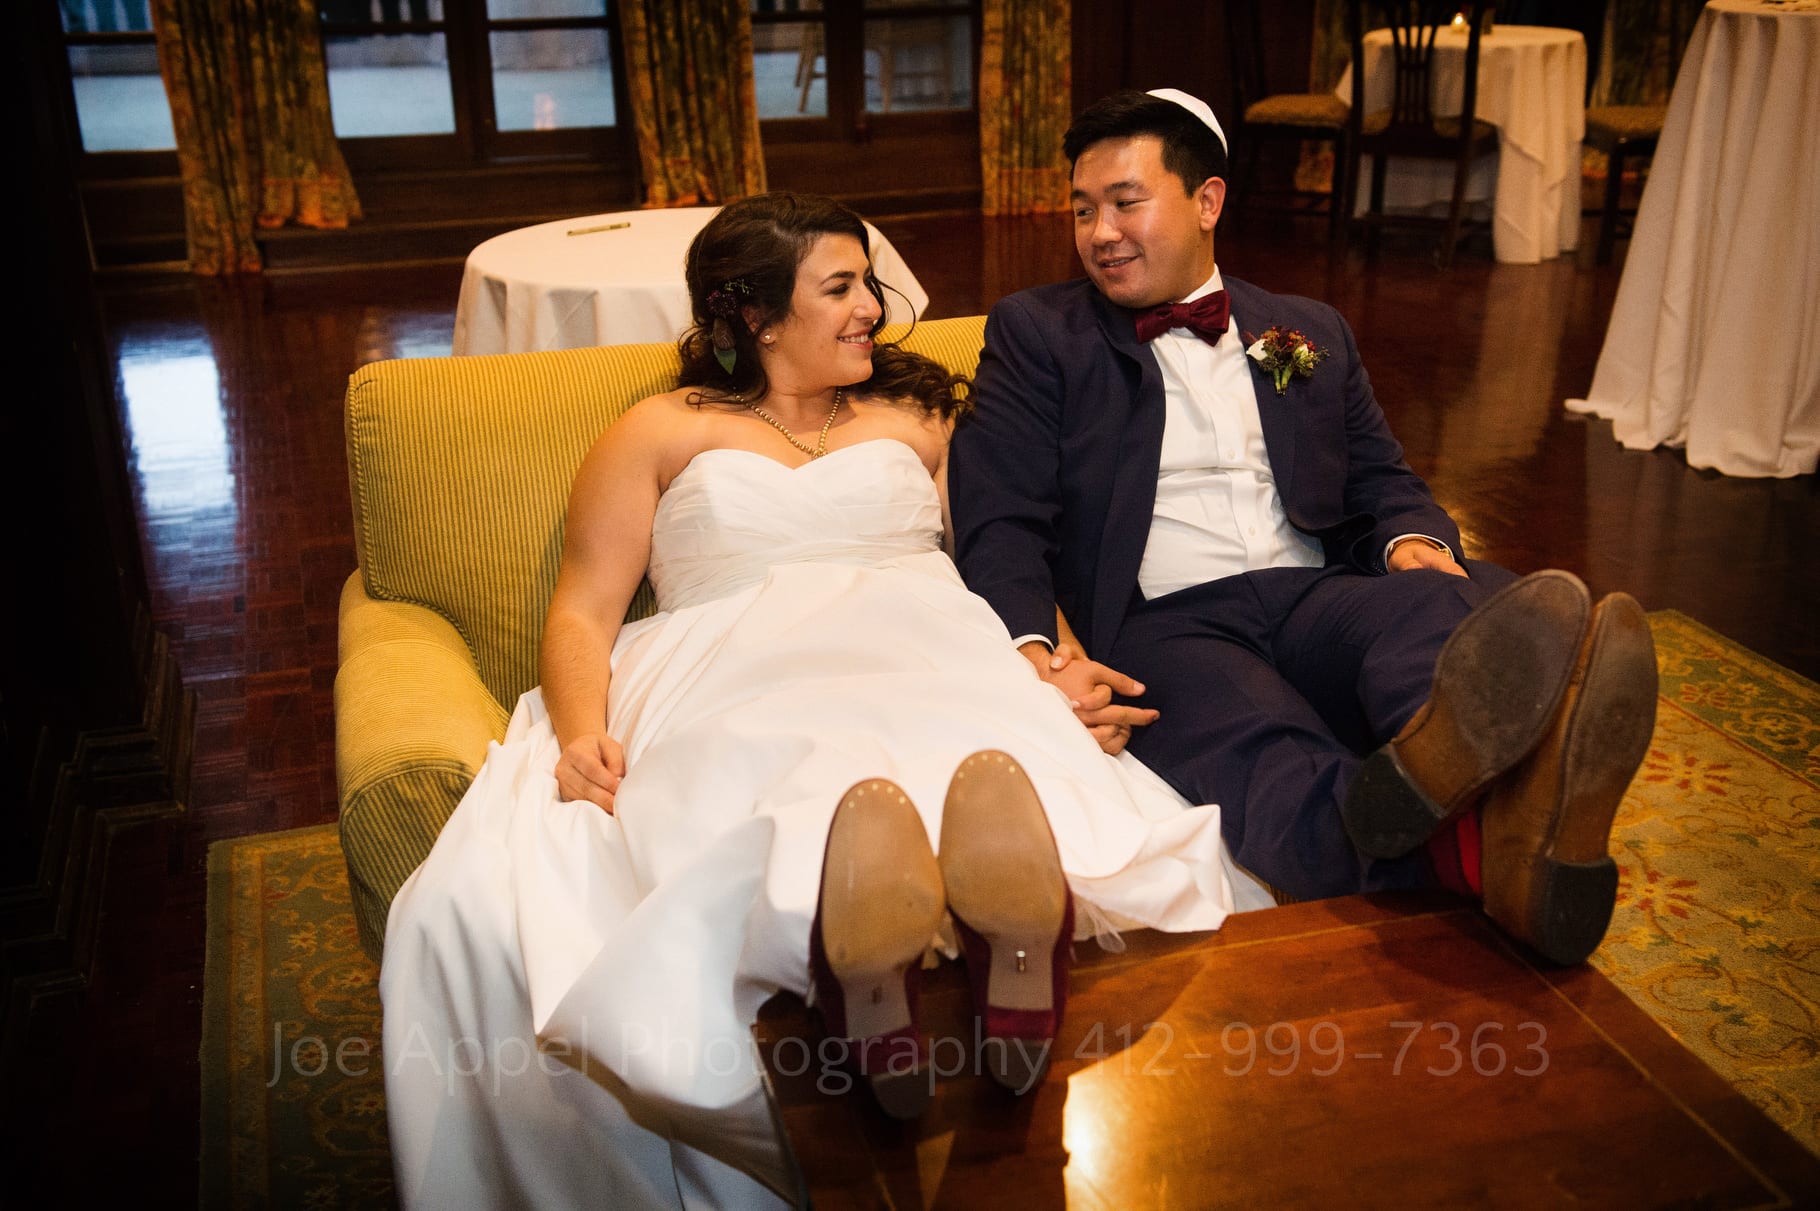 Bride and groom relax as they sit next to one another with their feet up on a table.